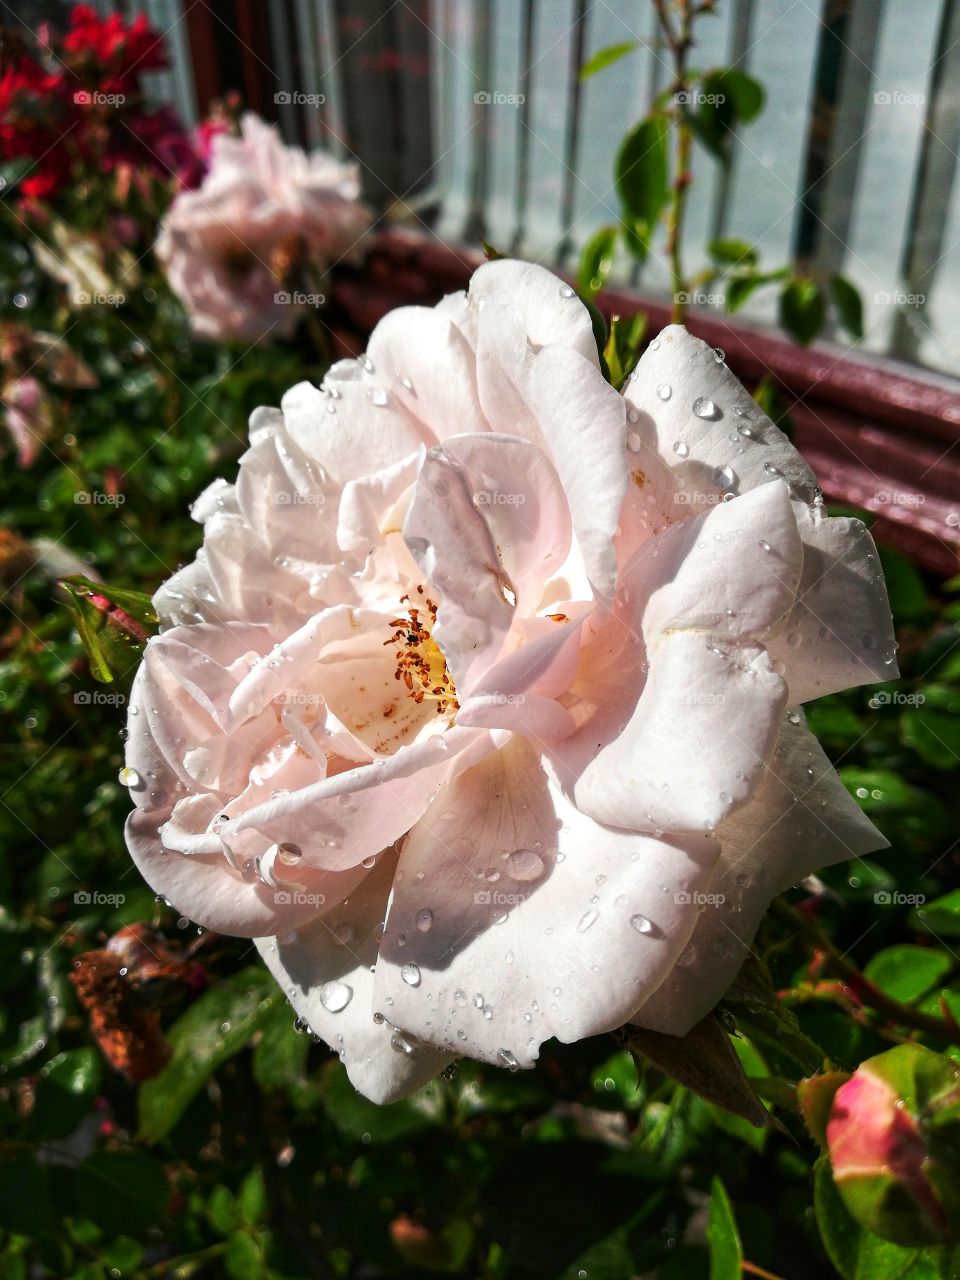 White flower with water droplets on